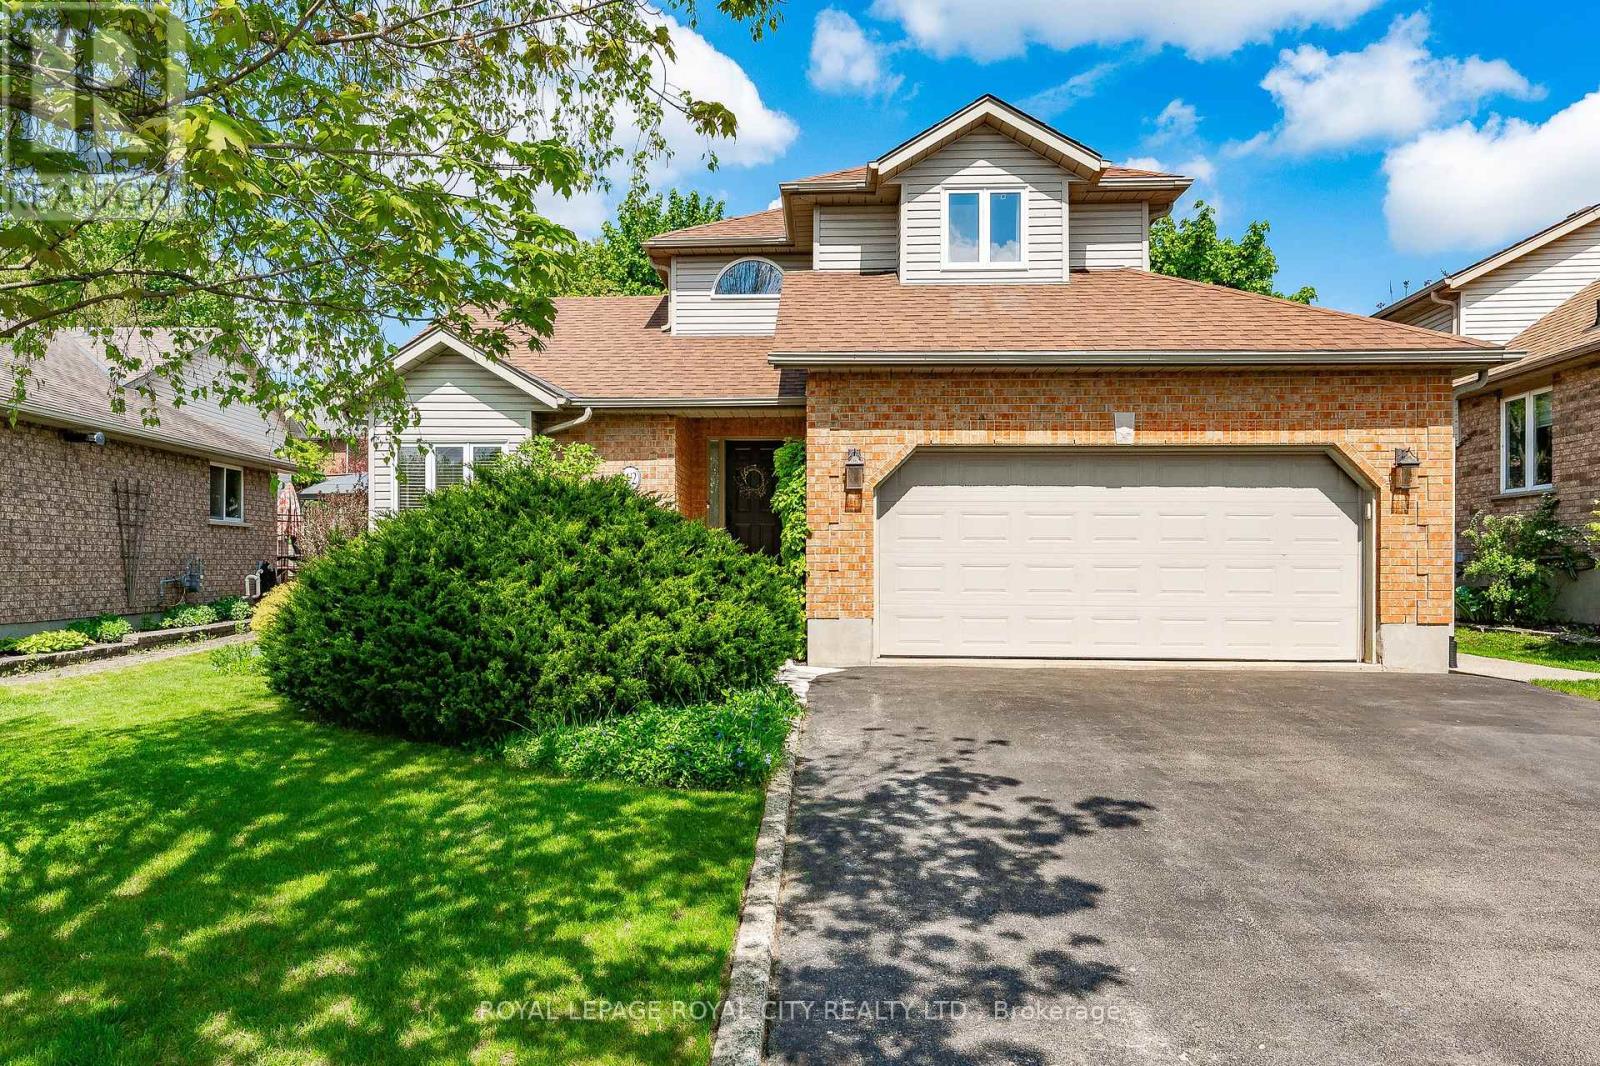 42 PEARTREE CRES, guelph, Ontario